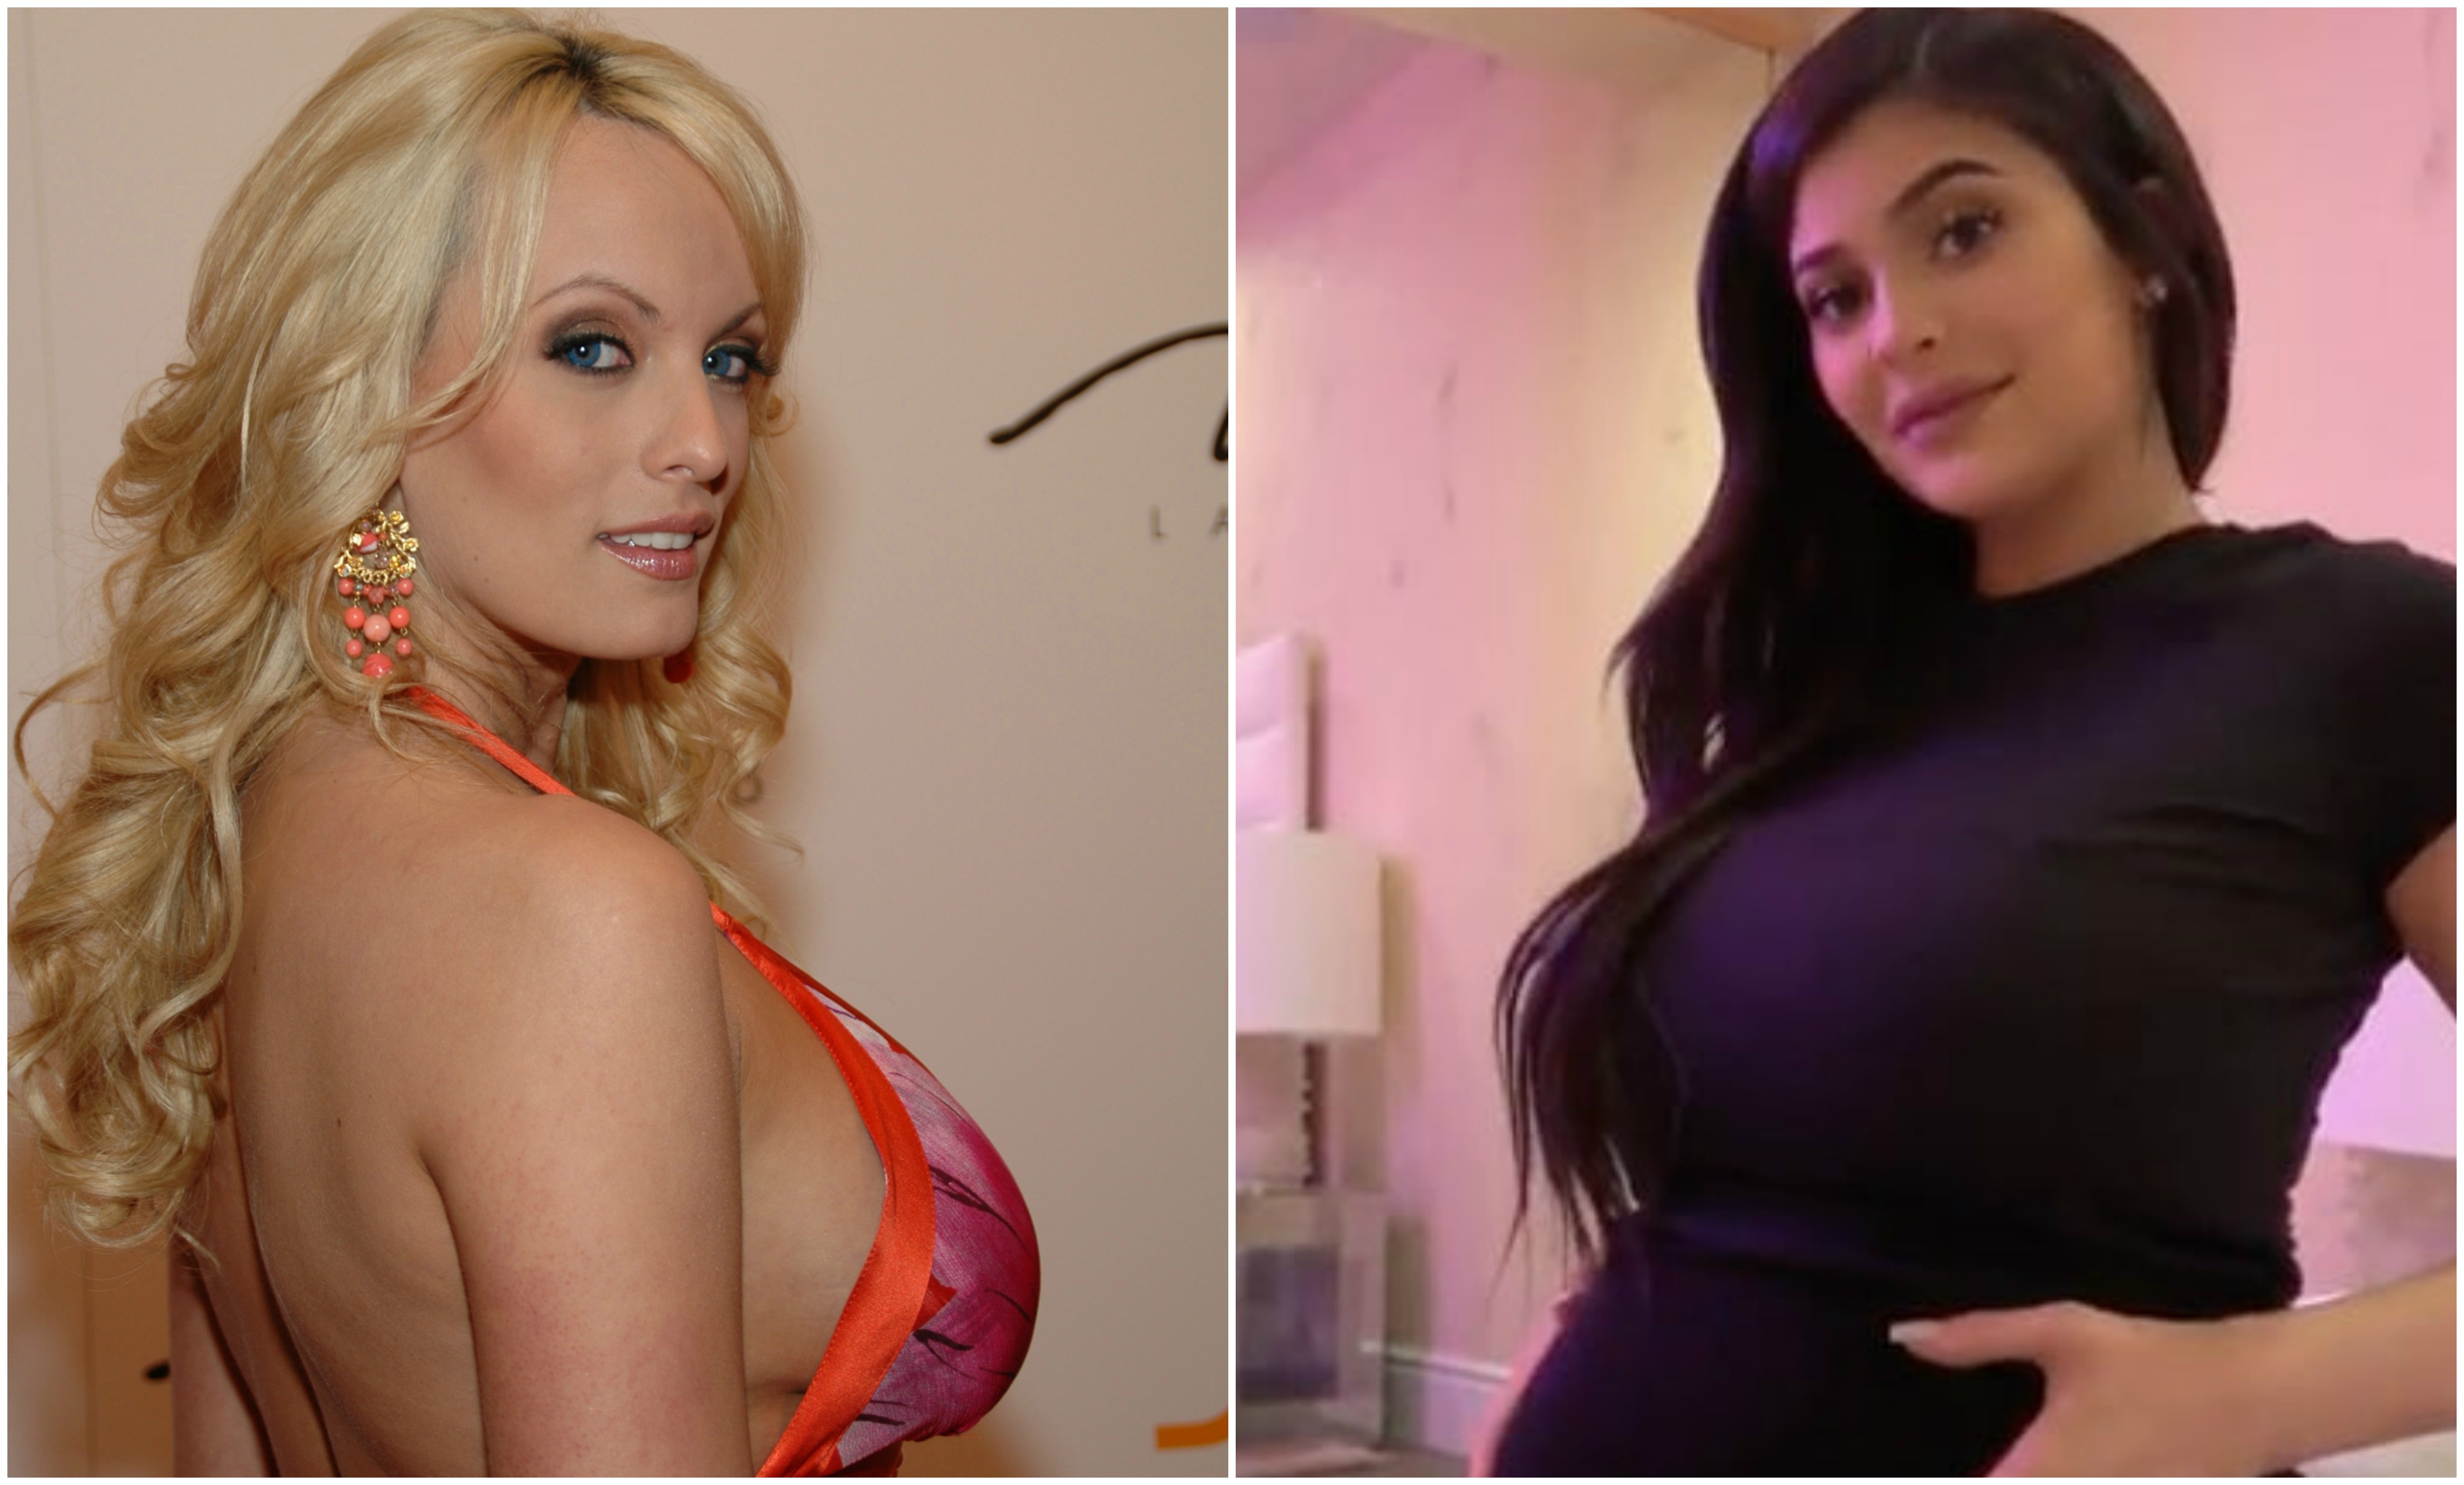 Porn Pregnant Star Stormy Daniels - Stormy Daniels Offers Advice to Kylie Jenner's Daughter Stormi